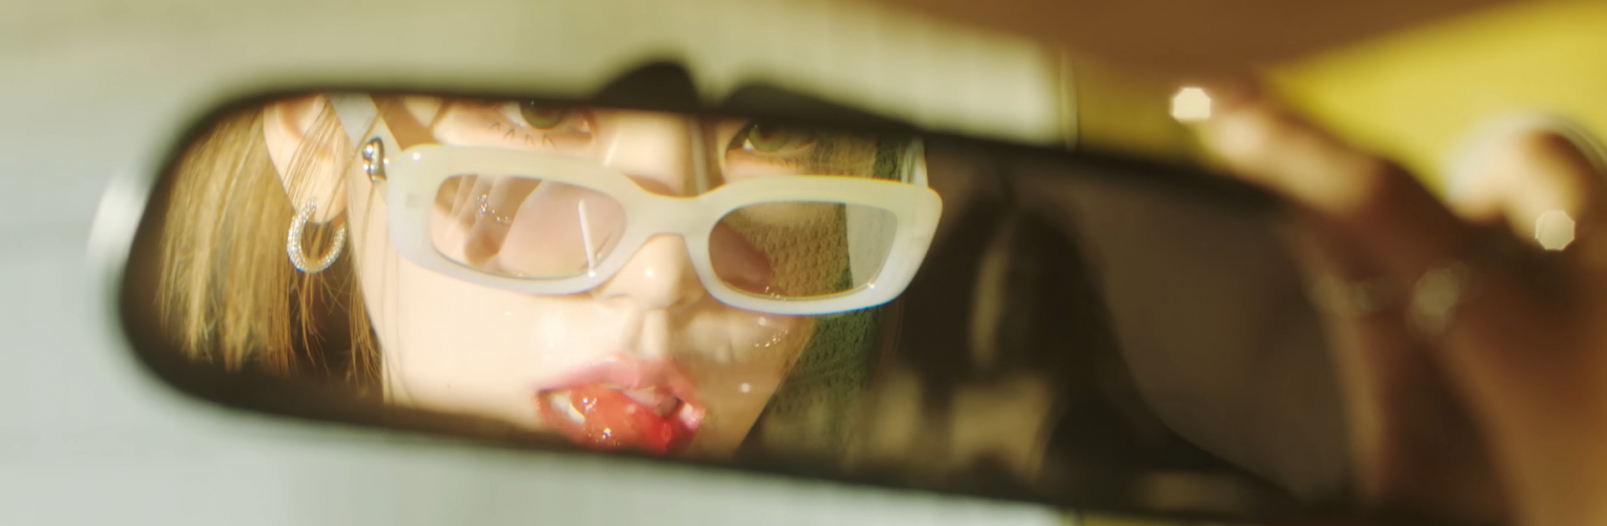 In a truck's rear view mirror we see a partial reflection of Yeji from ITZY. We see part of her face, and she is wearing glasses down on the tip of her nose as she looks in the mirror and puts a lollipop to her mouth